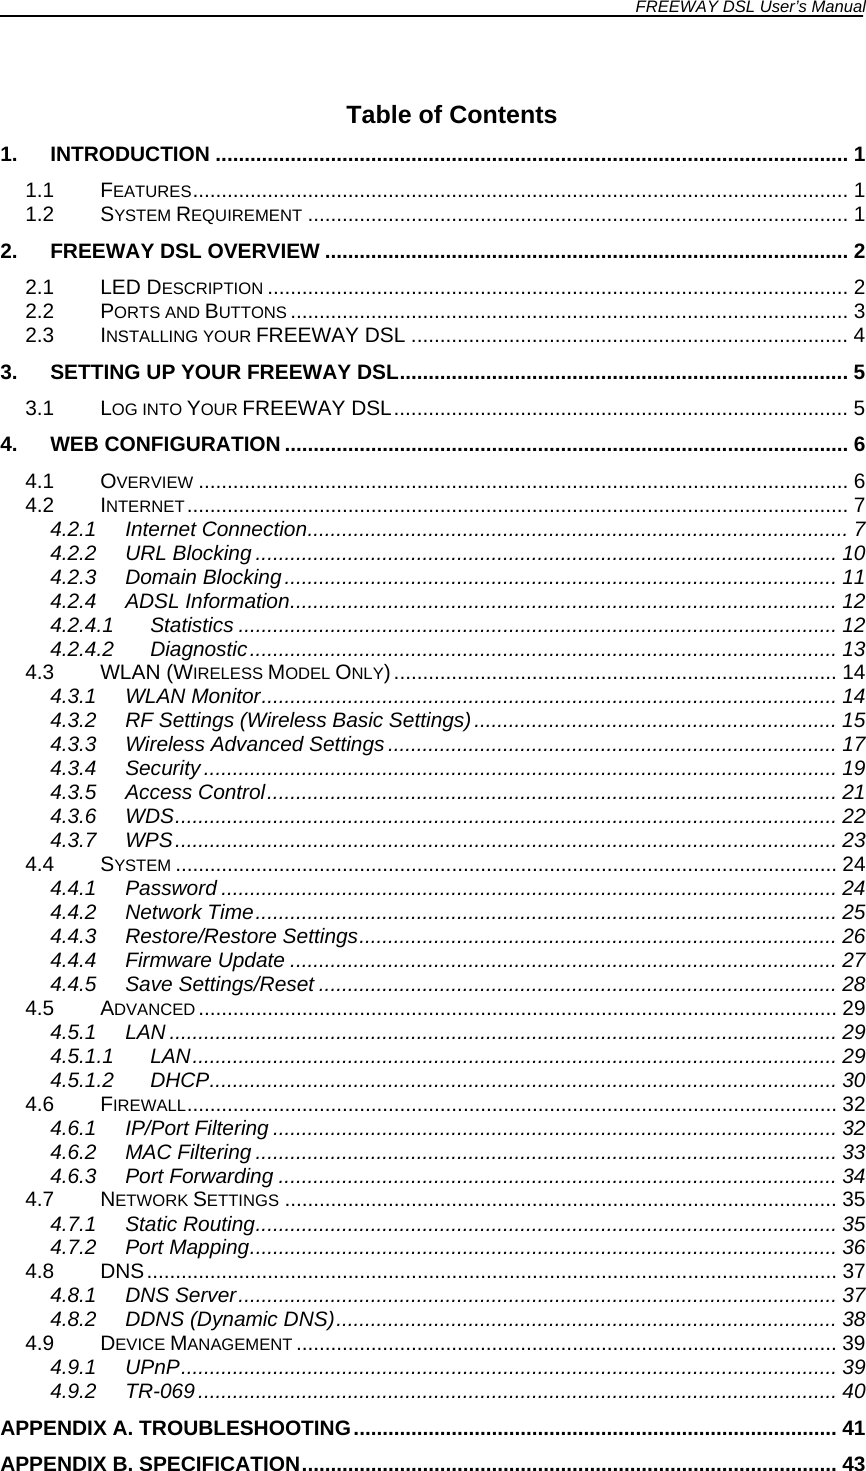 FREEWAY DSL User’s Manual   Table of Contents 1. INTRODUCTION .............................................................................................................. 1 1.1 FEATURES.................................................................................................................. 1 1.2 SYSTEM REQUIREMENT .............................................................................................. 1 2. FREEWAY DSL OVERVIEW ........................................................................................... 2 2.1 LED DESCRIPTION ..................................................................................................... 2 2.2 PORTS AND BUTTONS ................................................................................................. 3 2.3 INSTALLING YOUR FREEWAY DSL ............................................................................ 4 3. SETTING UP YOUR FREEWAY DSL.............................................................................. 5 3.1 LOG INTO YOUR FREEWAY DSL............................................................................... 5 4. WEB CONFIGURATION .................................................................................................. 6 4.1 OVERVIEW ................................................................................................................. 6 4.2 INTERNET................................................................................................................... 7 4.2.1 Internet Connection.............................................................................................. 7 4.2.2 URL Blocking ..................................................................................................... 10 4.2.3 Domain Blocking................................................................................................ 11 4.2.4 ADSL Information............................................................................................... 12 4.2.4.1 Statistics ........................................................................................................ 12 4.2.4.2 Diagnostic...................................................................................................... 13 4.3 WLAN (WIRELESS MODEL ONLY)............................................................................. 14 4.3.1 WLAN Monitor.................................................................................................... 14 4.3.2 RF Settings (Wireless Basic Settings)............................................................... 15 4.3.3 Wireless Advanced Settings.............................................................................. 17 4.3.4 Security .............................................................................................................. 19 4.3.5 Access Control................................................................................................... 21 4.3.6 WDS................................................................................................................... 22 4.3.7 WPS................................................................................................................... 23 4.4 SYSTEM ................................................................................................................... 24 4.4.1 Password ........................................................................................................... 24 4.4.2 Network Time..................................................................................................... 25 4.4.3 Restore/Restore Settings................................................................................... 26 4.4.4 Firmware Update ............................................................................................... 27 4.4.5 Save Settings/Reset .......................................................................................... 28 4.5 ADVANCED ............................................................................................................... 29 4.5.1 LAN .................................................................................................................... 29 4.5.1.1 LAN................................................................................................................ 29 4.5.1.2 DHCP............................................................................................................. 30 4.6 FIREWALL................................................................................................................. 32 4.6.1 IP/Port Filtering .................................................................................................. 32 4.6.2 MAC Filtering ..................................................................................................... 33 4.6.3 Port Forwarding ................................................................................................. 34 4.7 NETWORK SETTINGS ................................................................................................ 35 4.7.1 Static Routing..................................................................................................... 35 4.7.2 Port Mapping...................................................................................................... 36 4.8 DNS........................................................................................................................ 37 4.8.1 DNS Server........................................................................................................ 37 4.8.2 DDNS (Dynamic DNS)....................................................................................... 38 4.9 DEVICE MANAGEMENT .............................................................................................. 39 4.9.1 UPnP.................................................................................................................. 39 4.9.2 TR-069............................................................................................................... 40 APPENDIX A. TROUBLESHOOTING.................................................................................... 41 APPENDIX B. SPECIFICATION............................................................................................. 43 